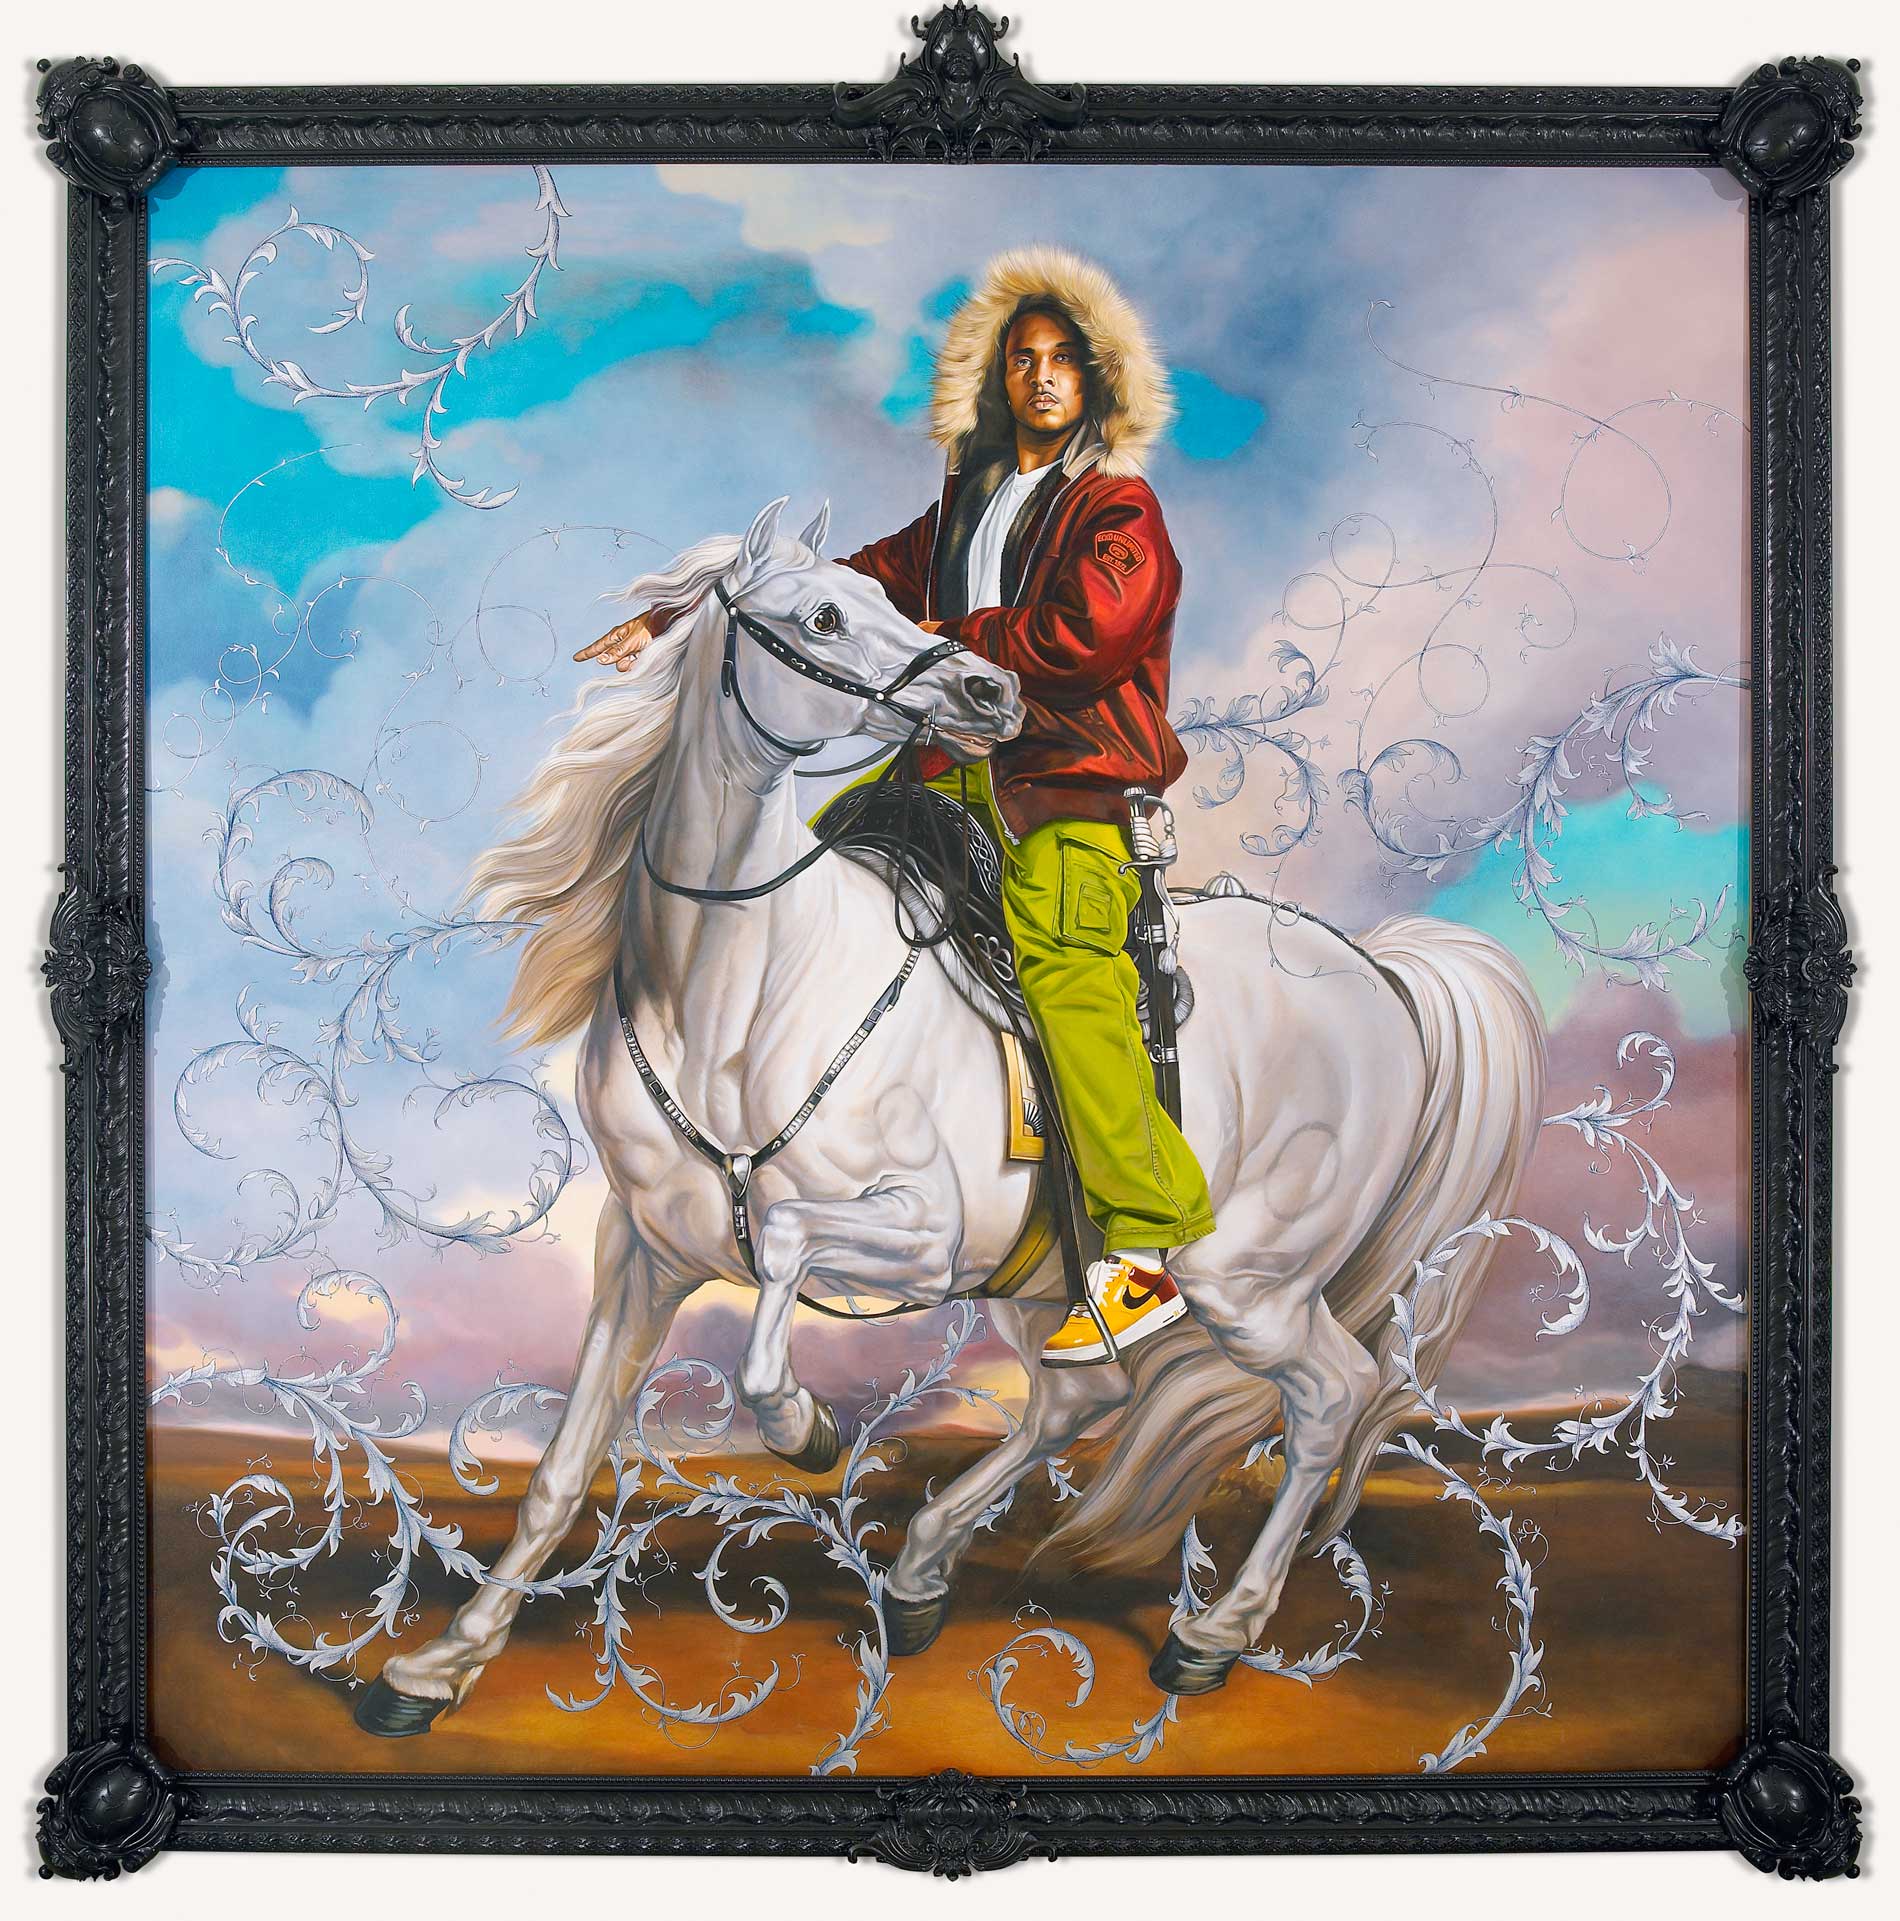 Kehinde Wiley | Rumors of War | Colonel Platoff on His Charger, 2008 Oil and Enamel on Canvas.  | 5